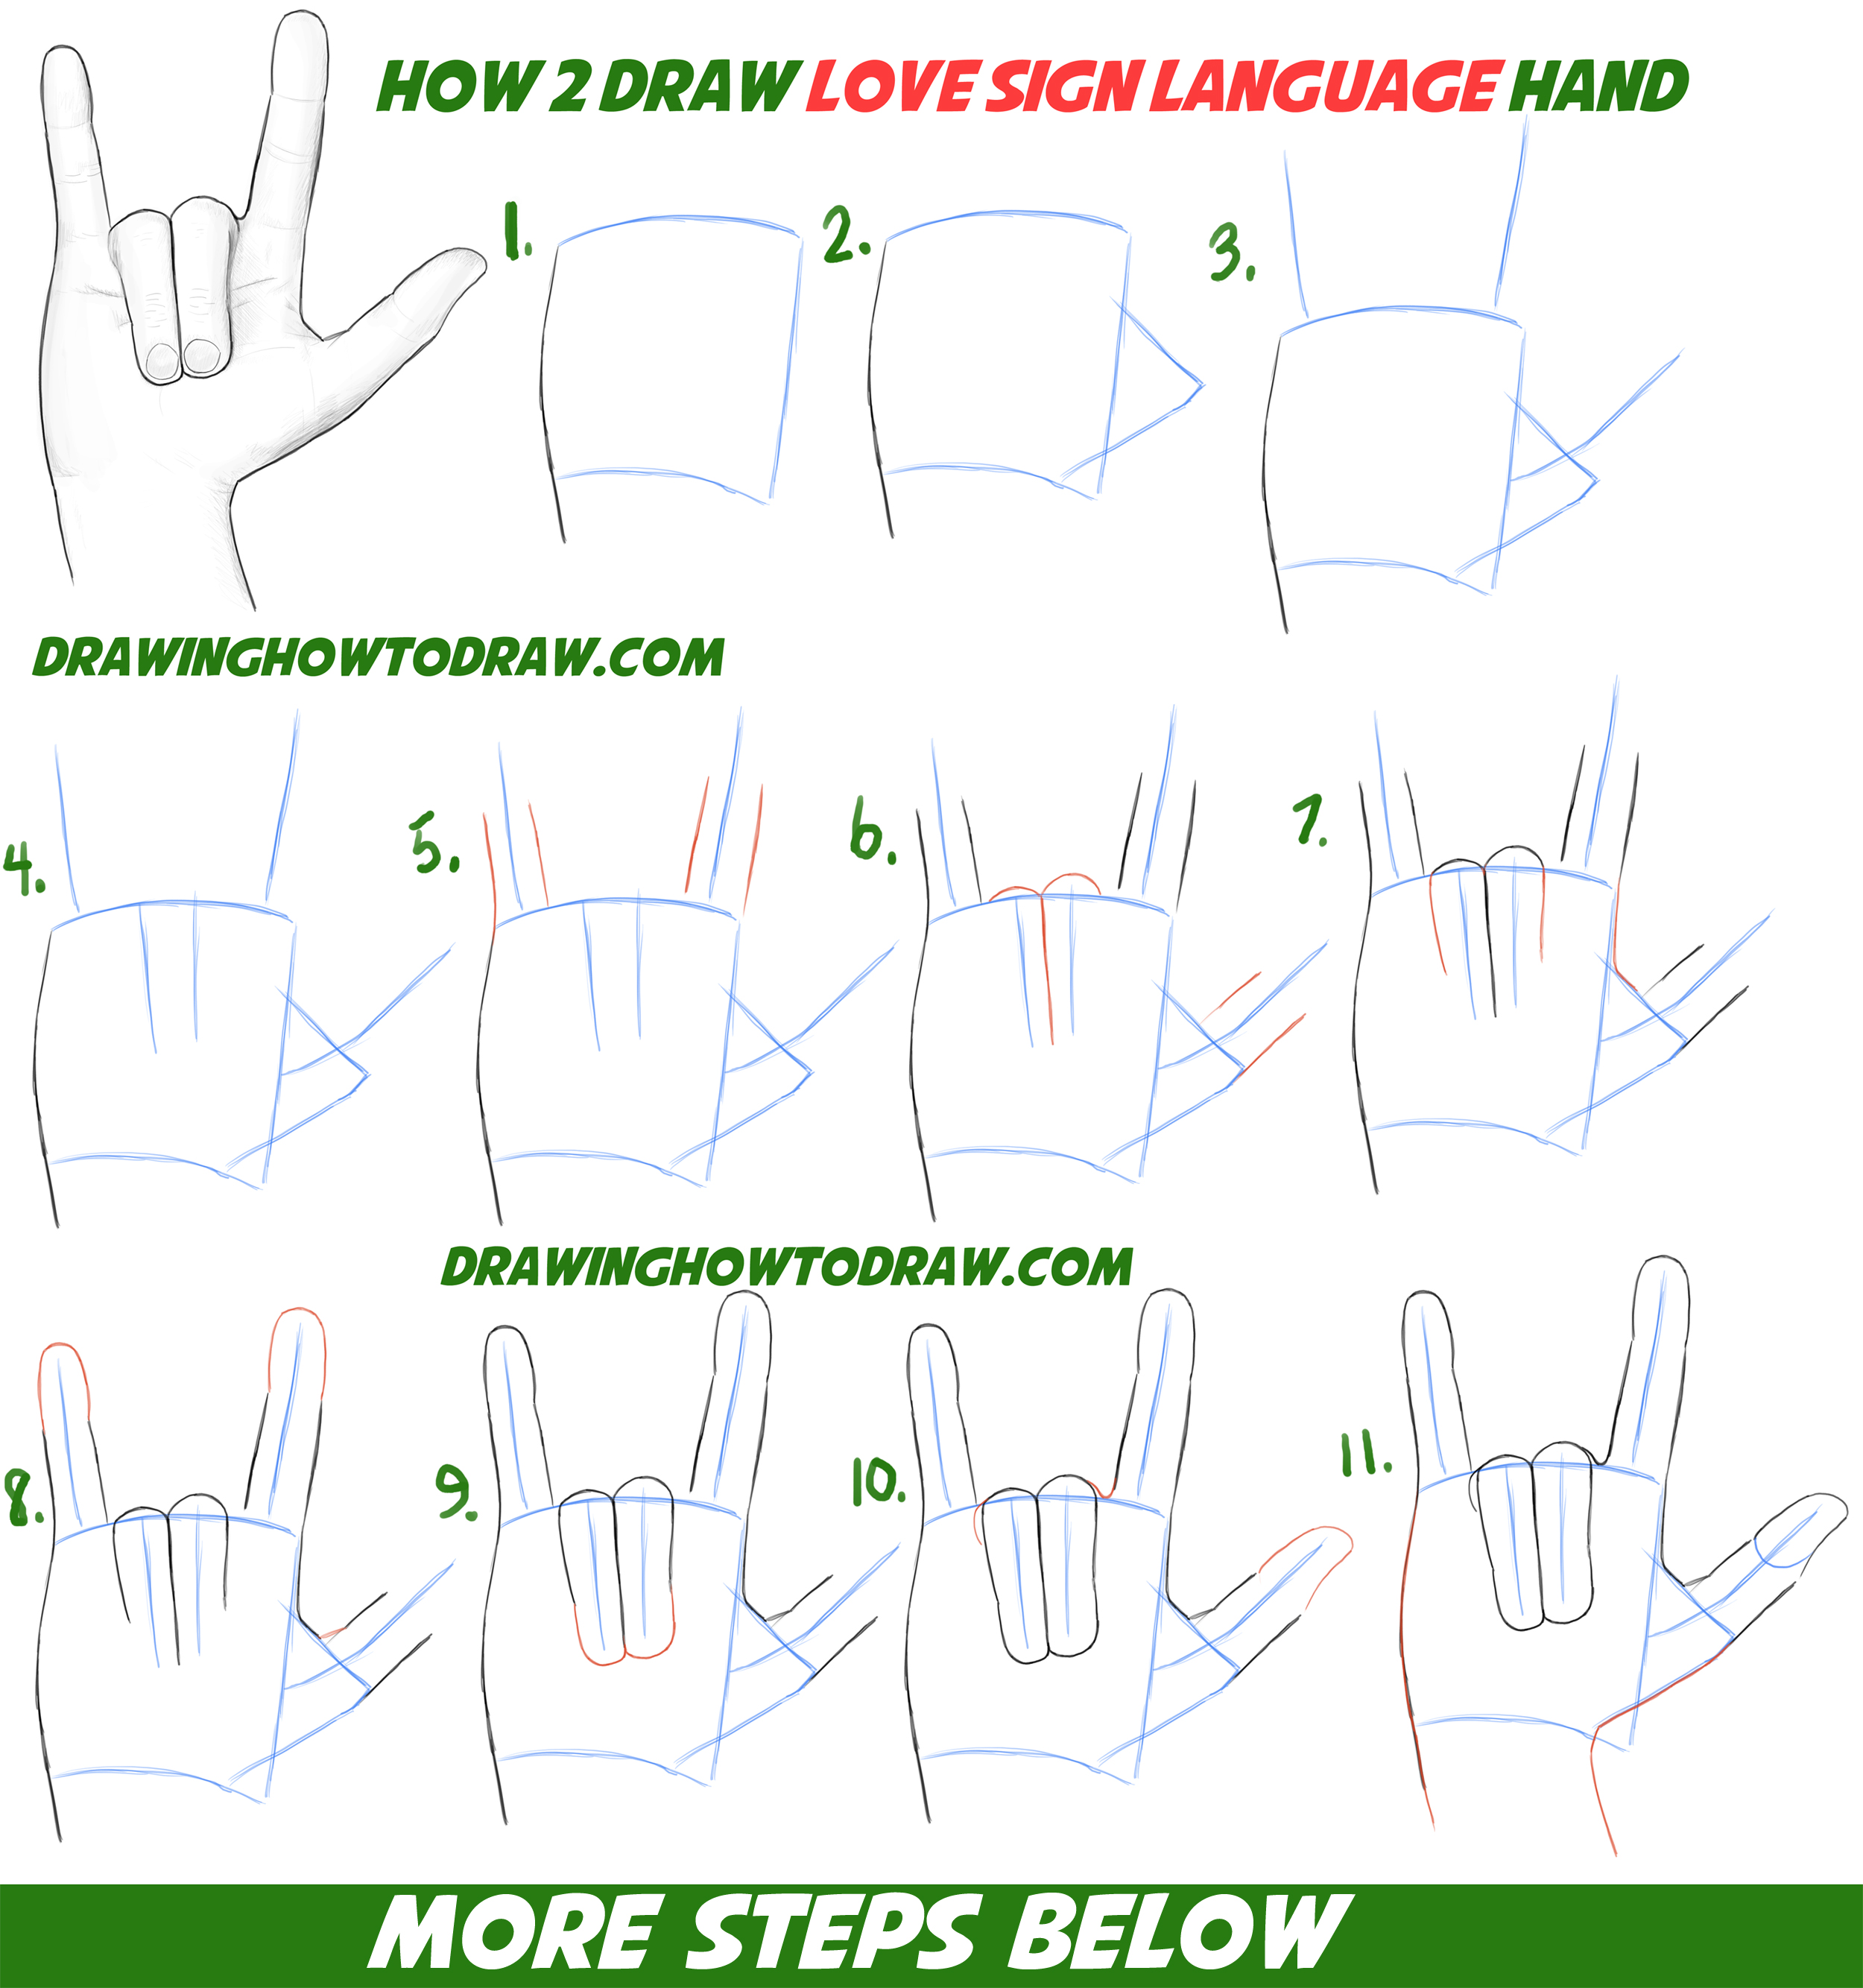 How to Draw Love Hands - Sign Language for Love - Easy Step by Step Drawing Tutorial for Beginners